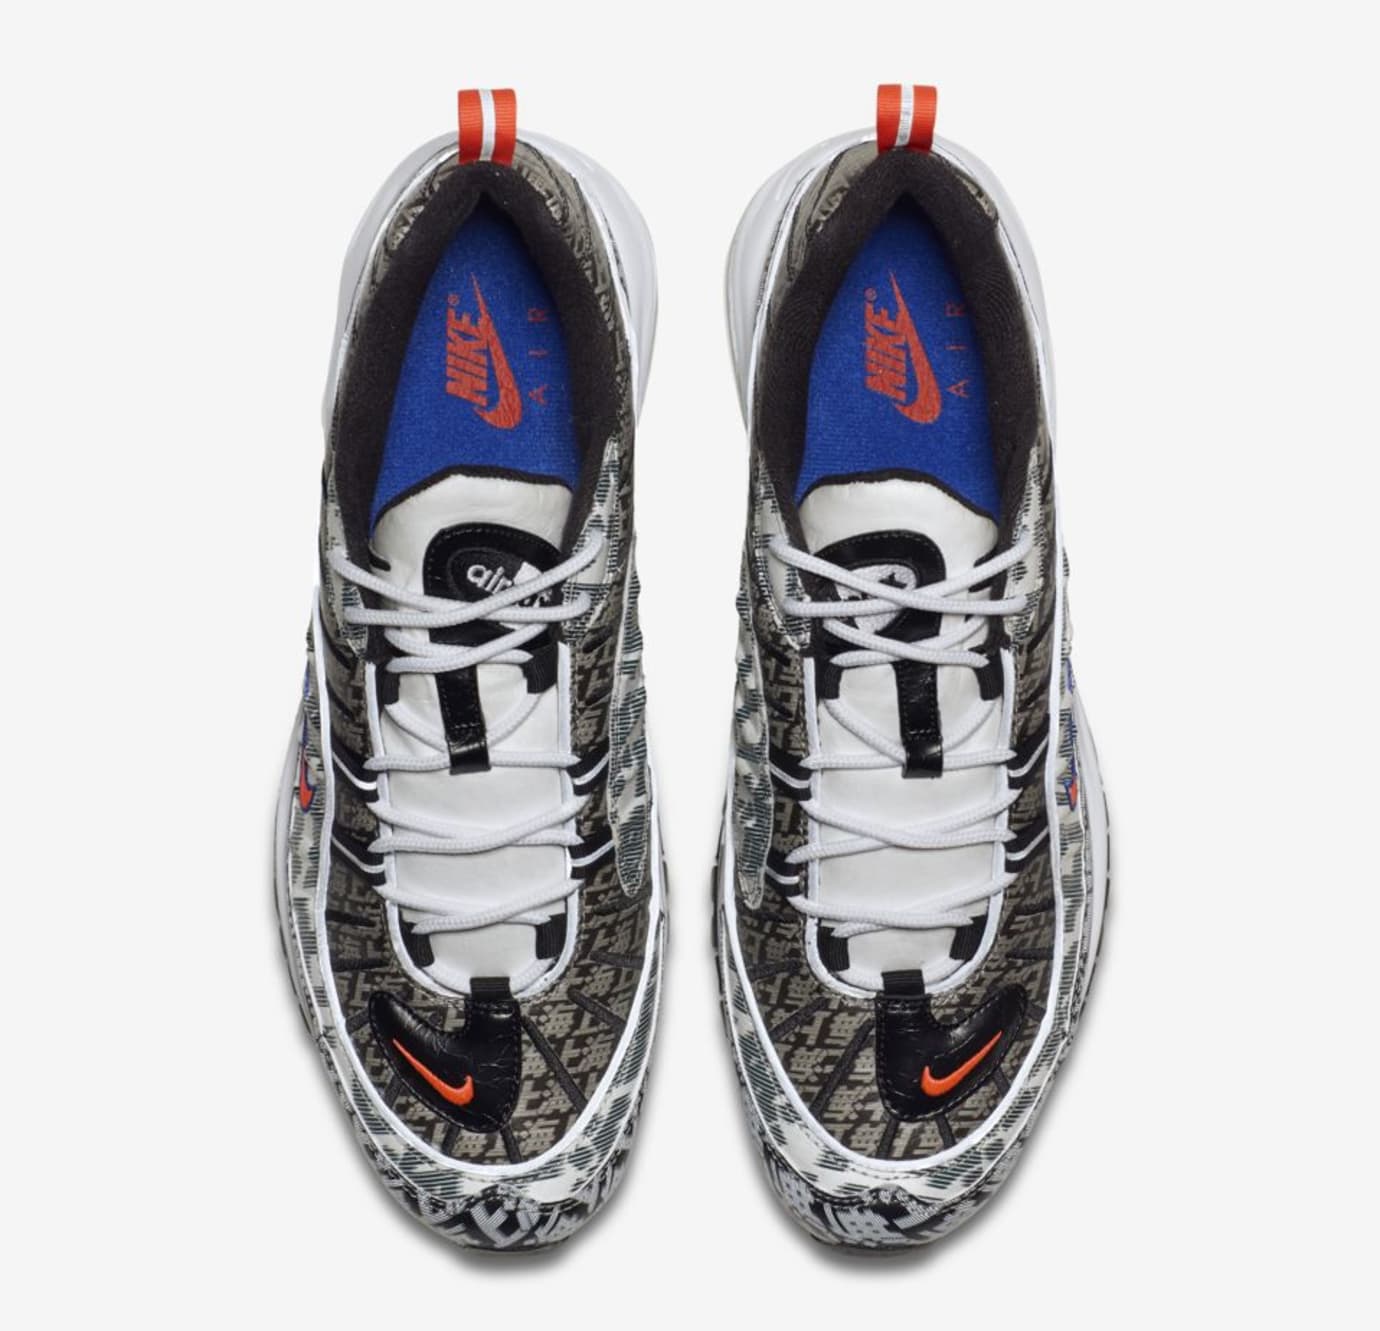 air max 98 just do it